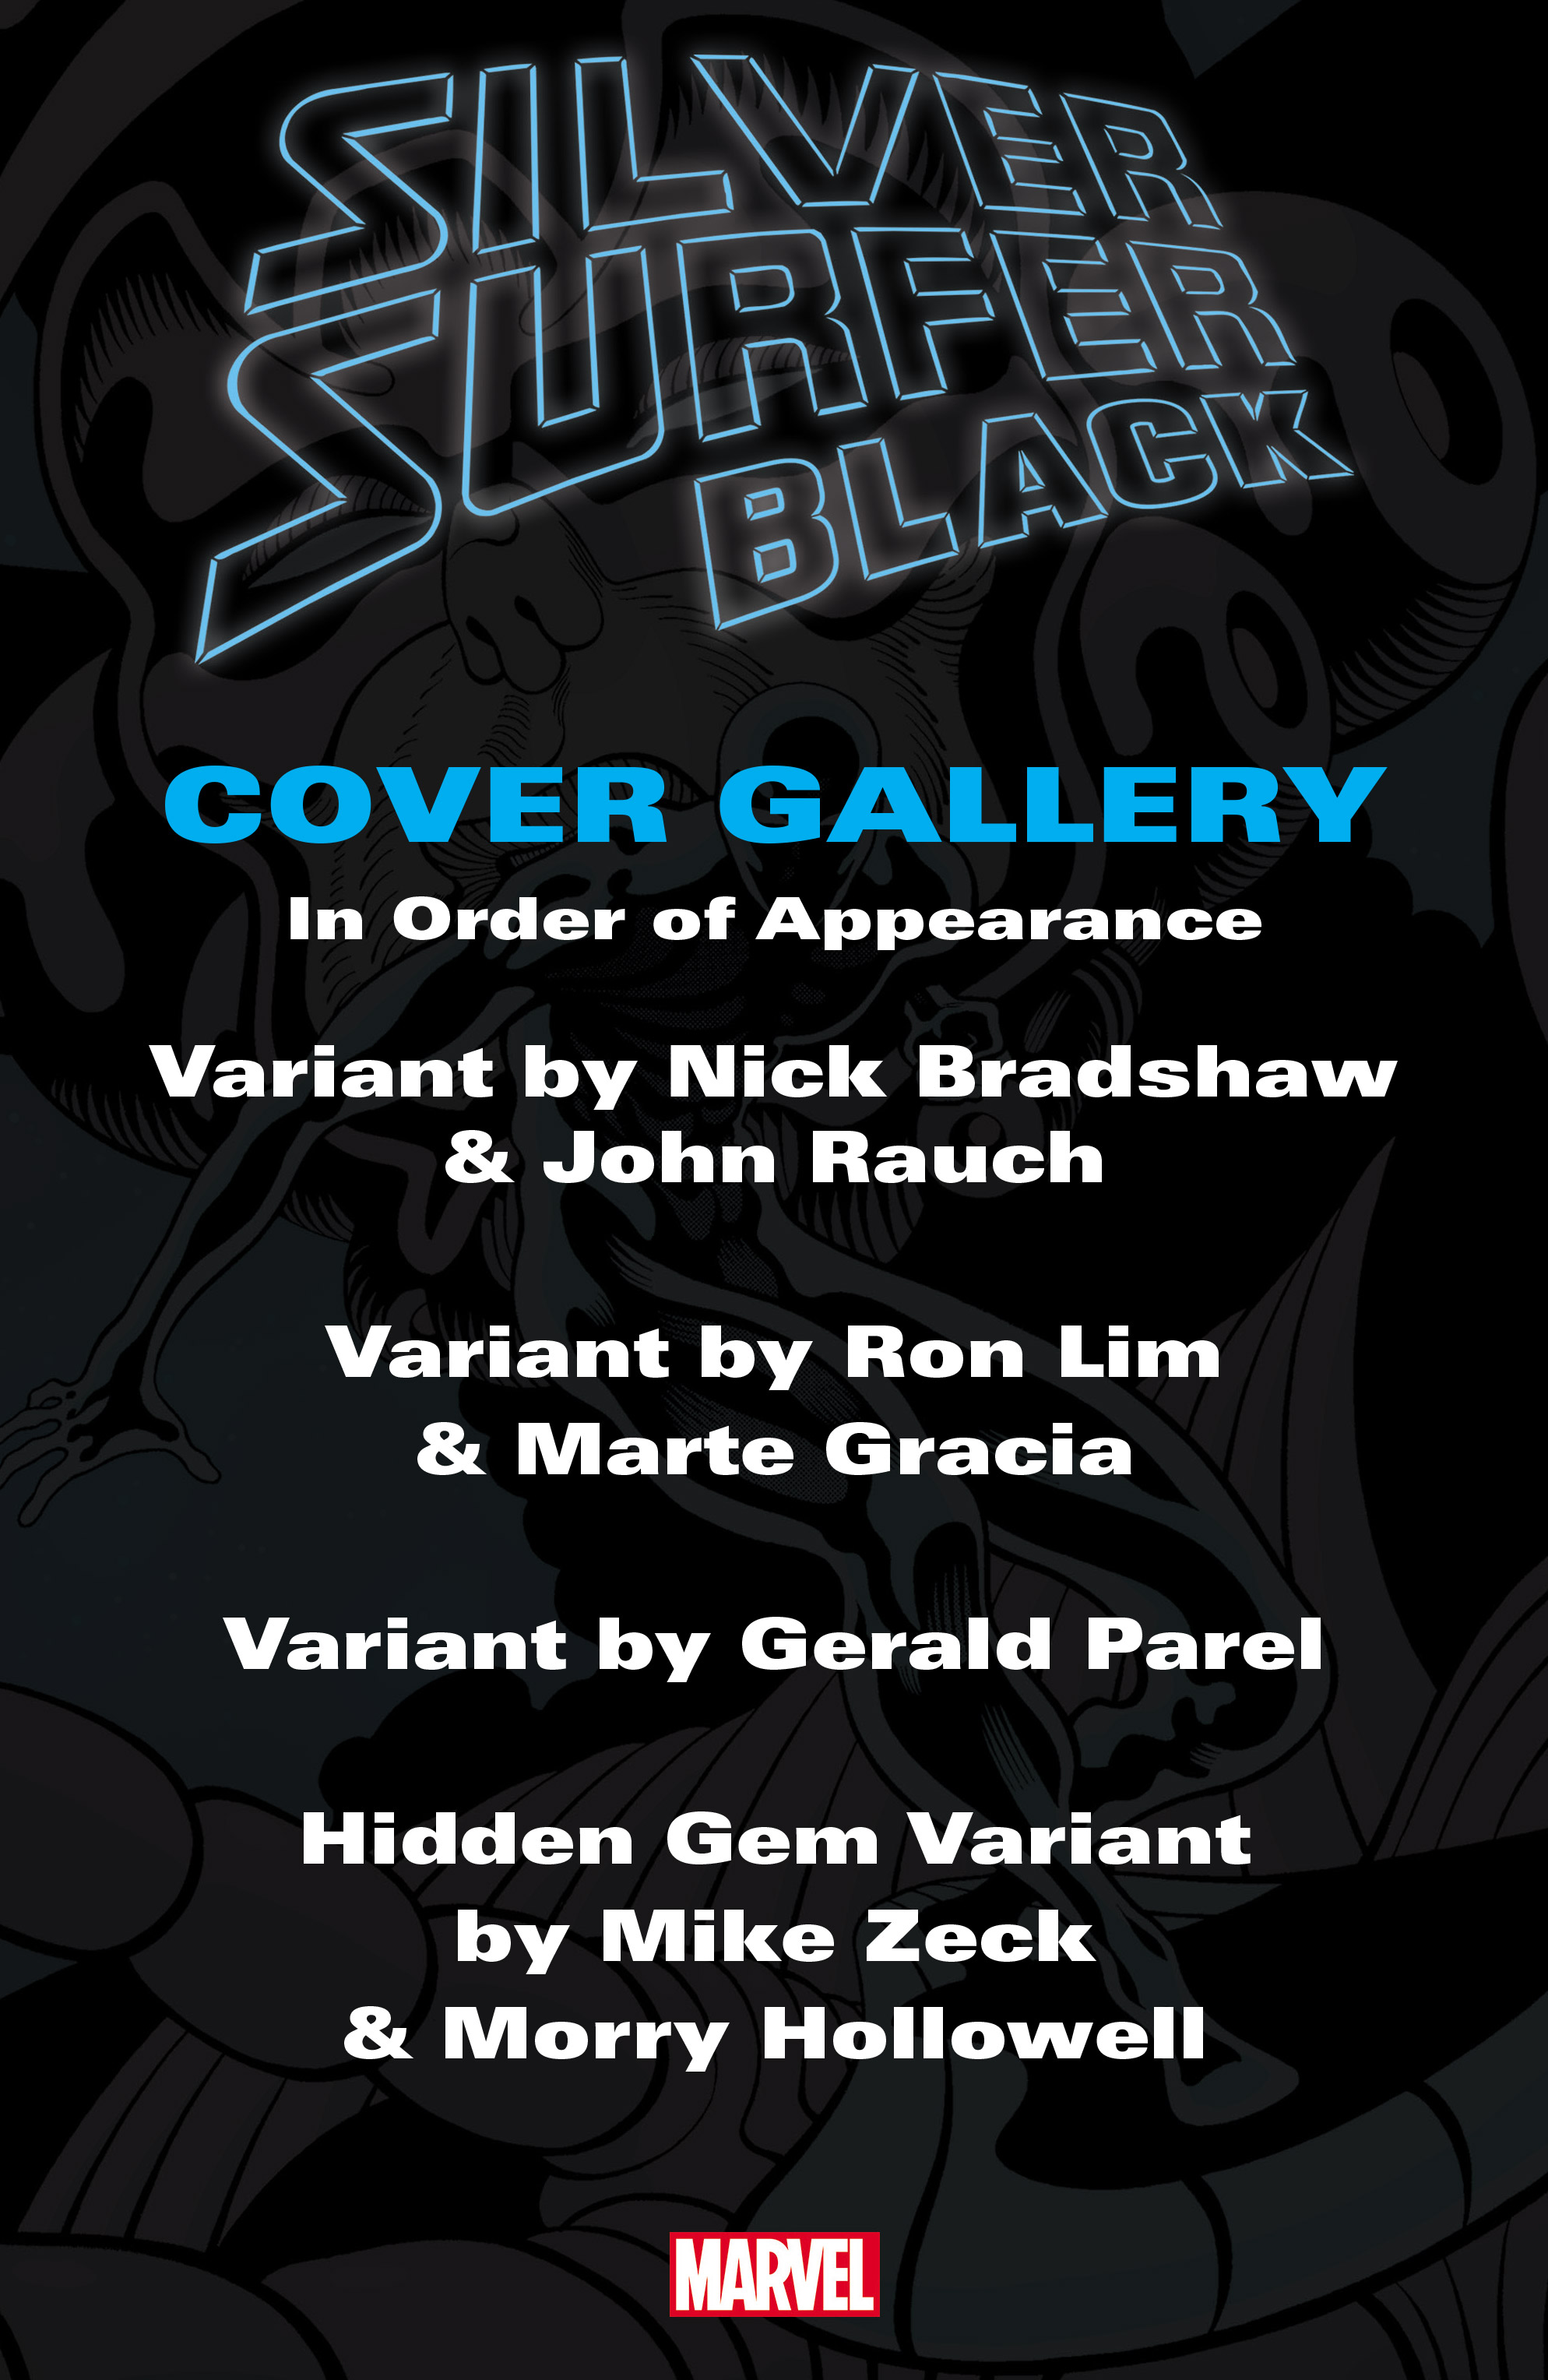 Read online Silver Surfer: Black comic -  Issue # _Director_s_Cut - 26